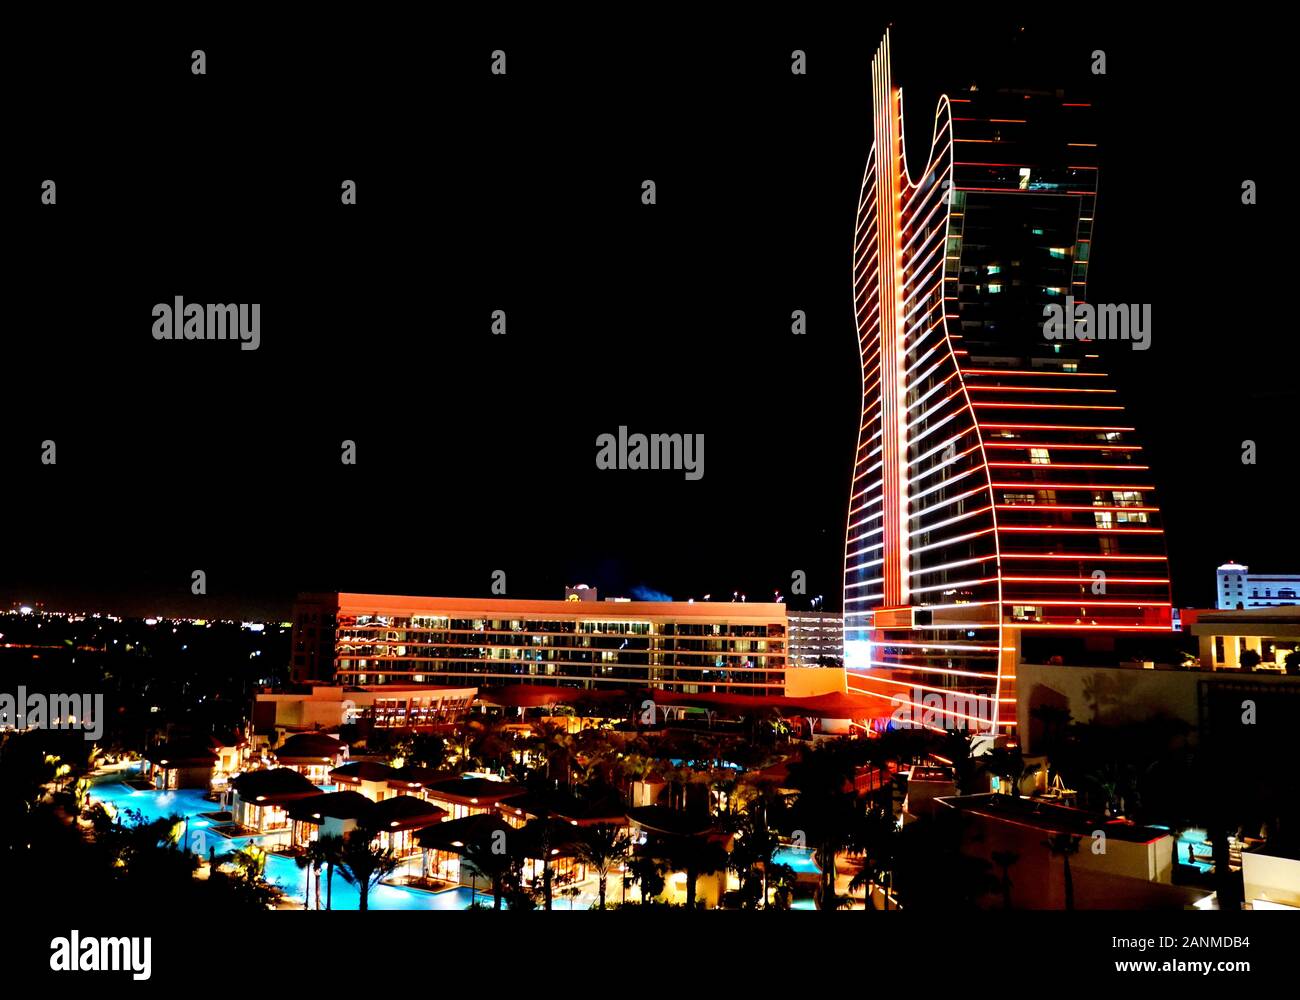 Hollywood, Florida, U.S.A - January 3, 2020 - Seminole Hard Rock Hotel and Casino illuminated with red and yellow neon lights at night Stock Photo